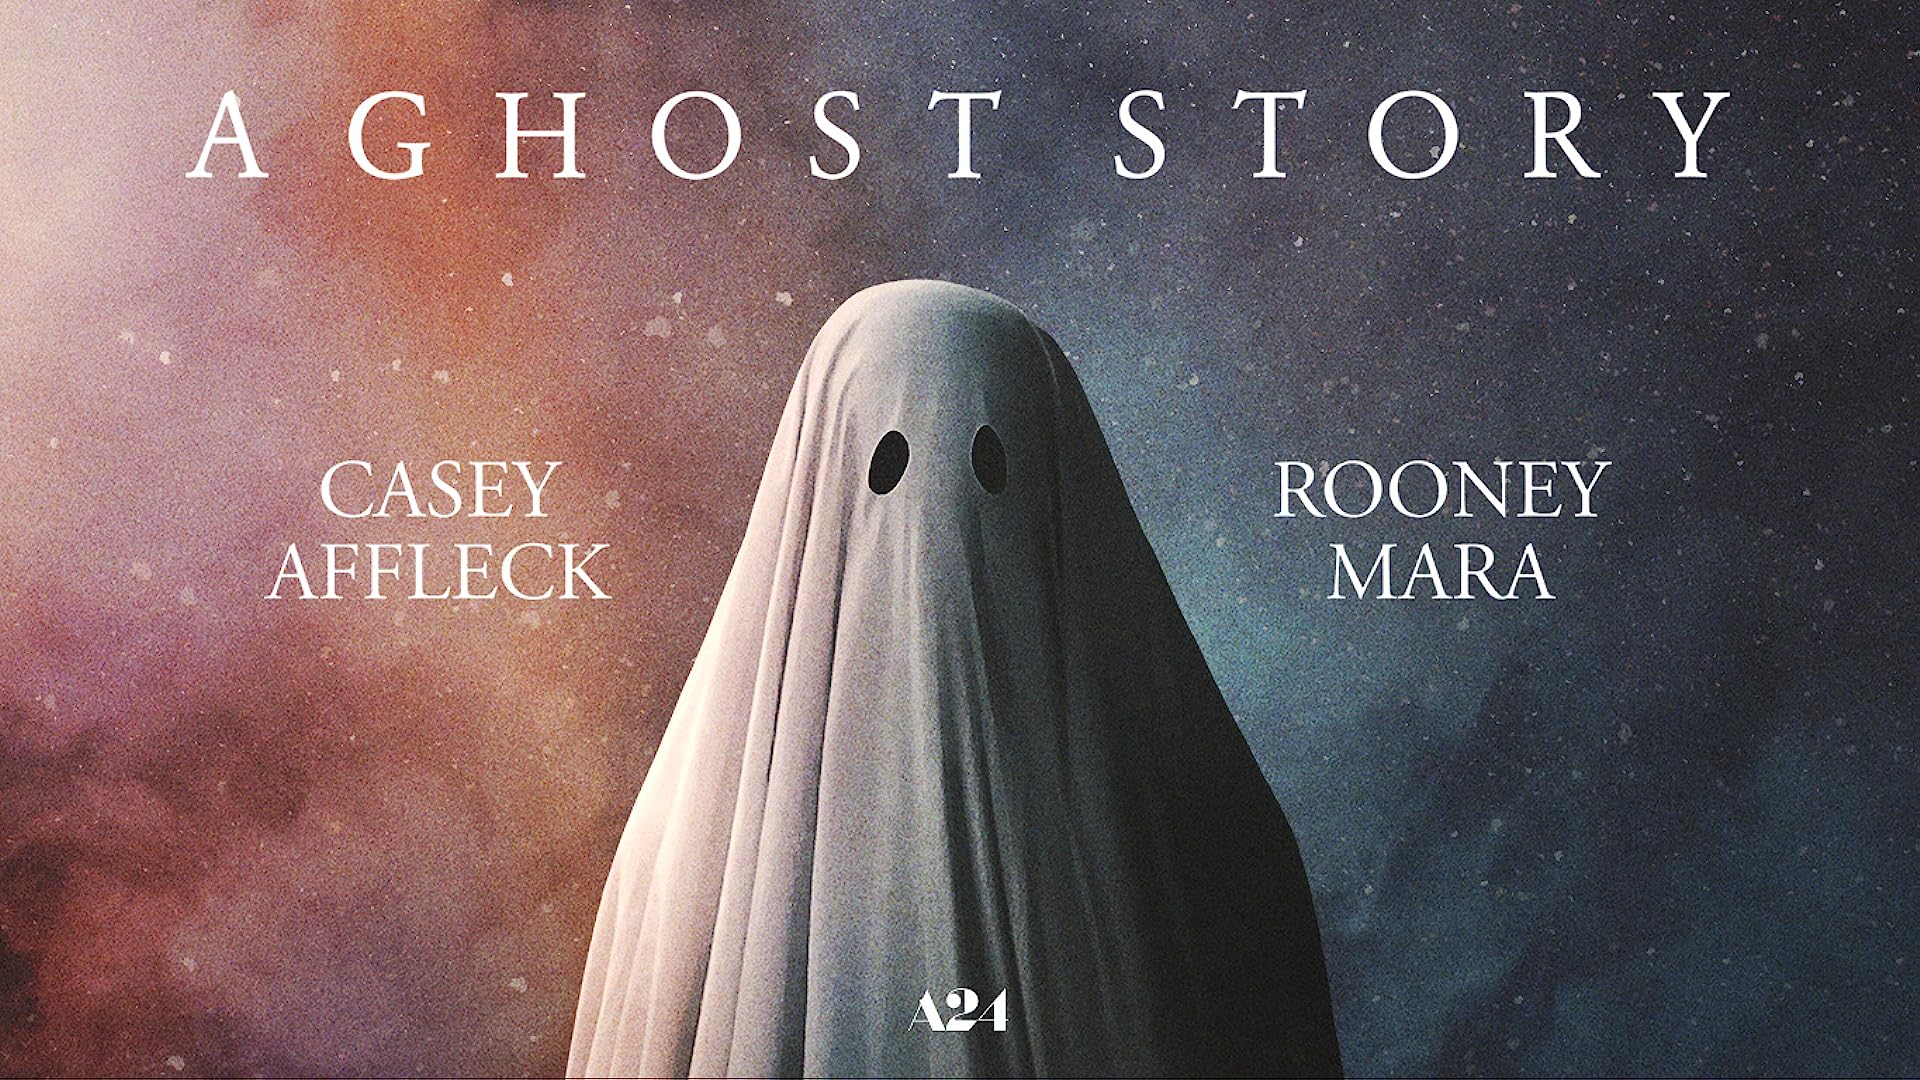 42-facts-about-the-movie-a-ghost-story